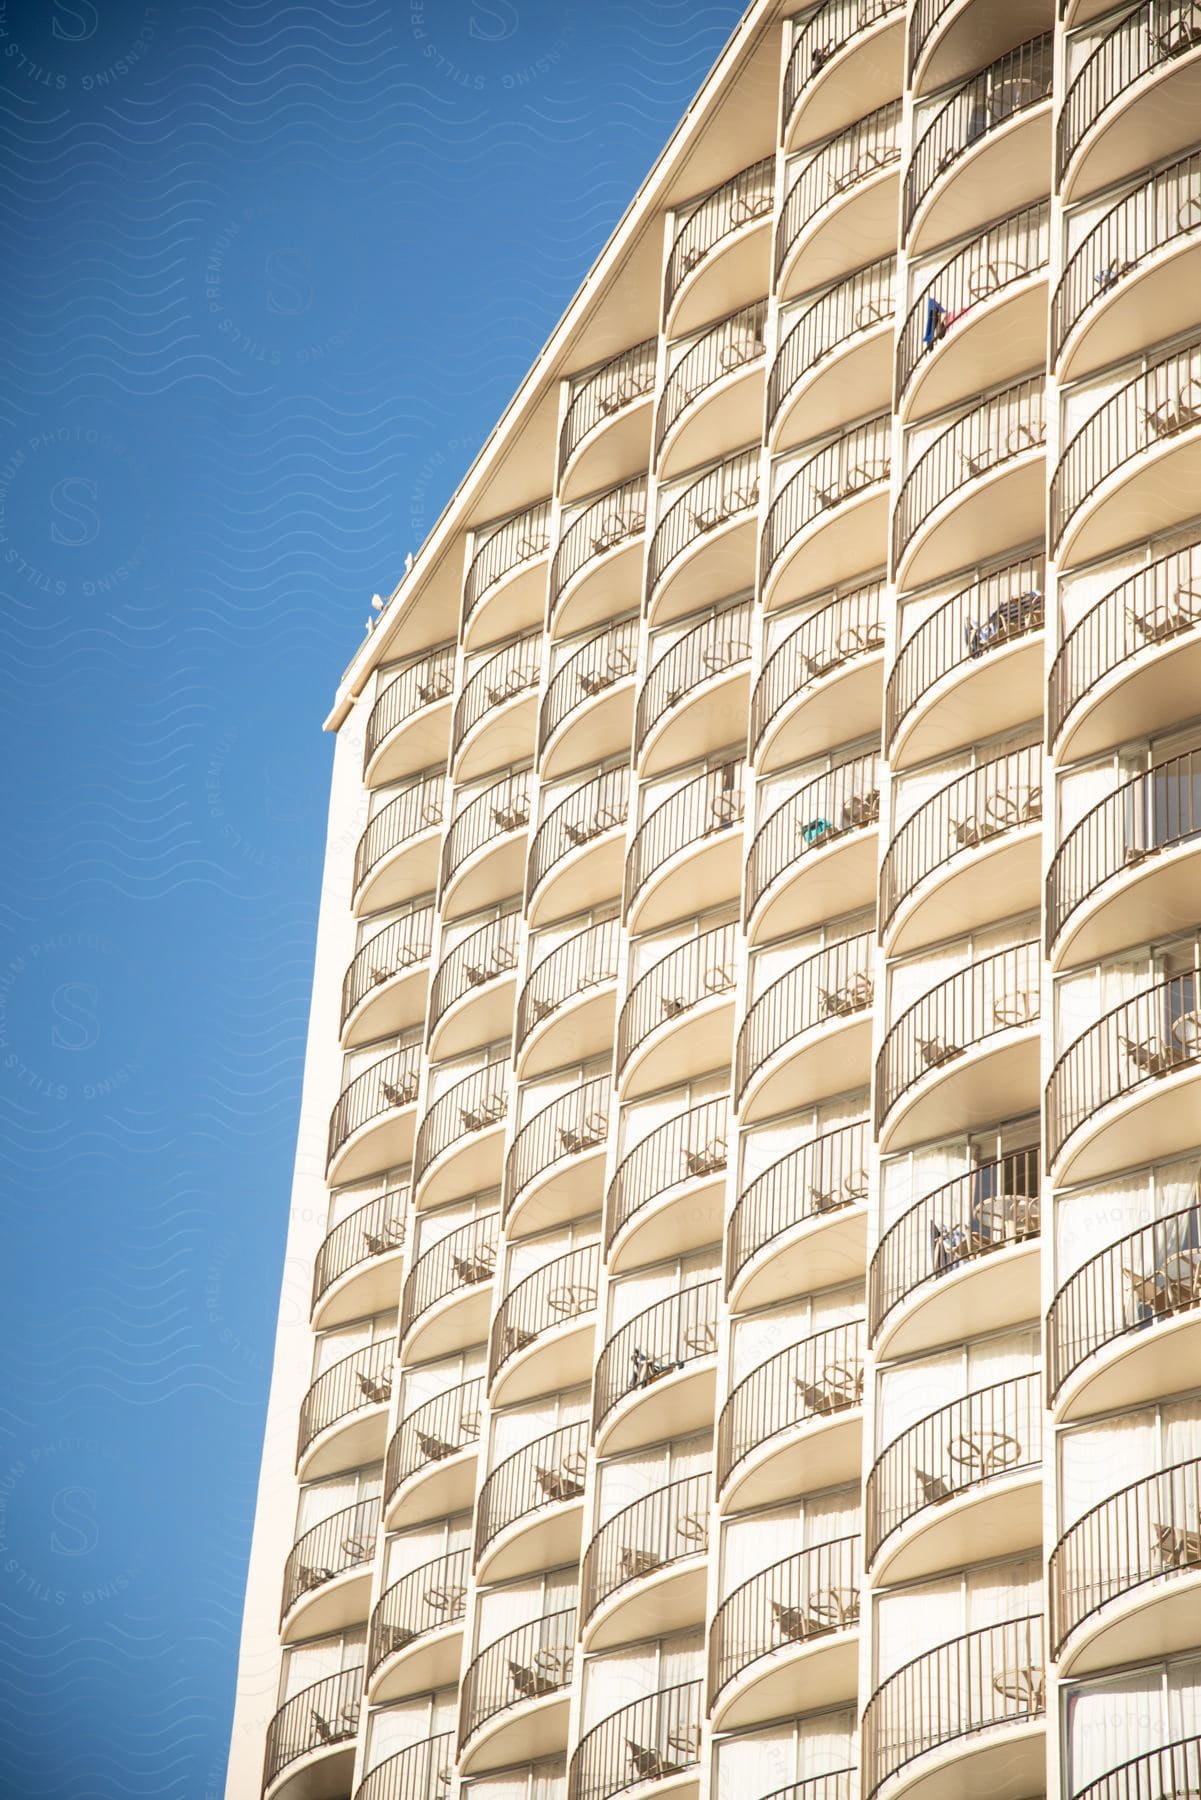 A view of a building with a lot of balconies on it.